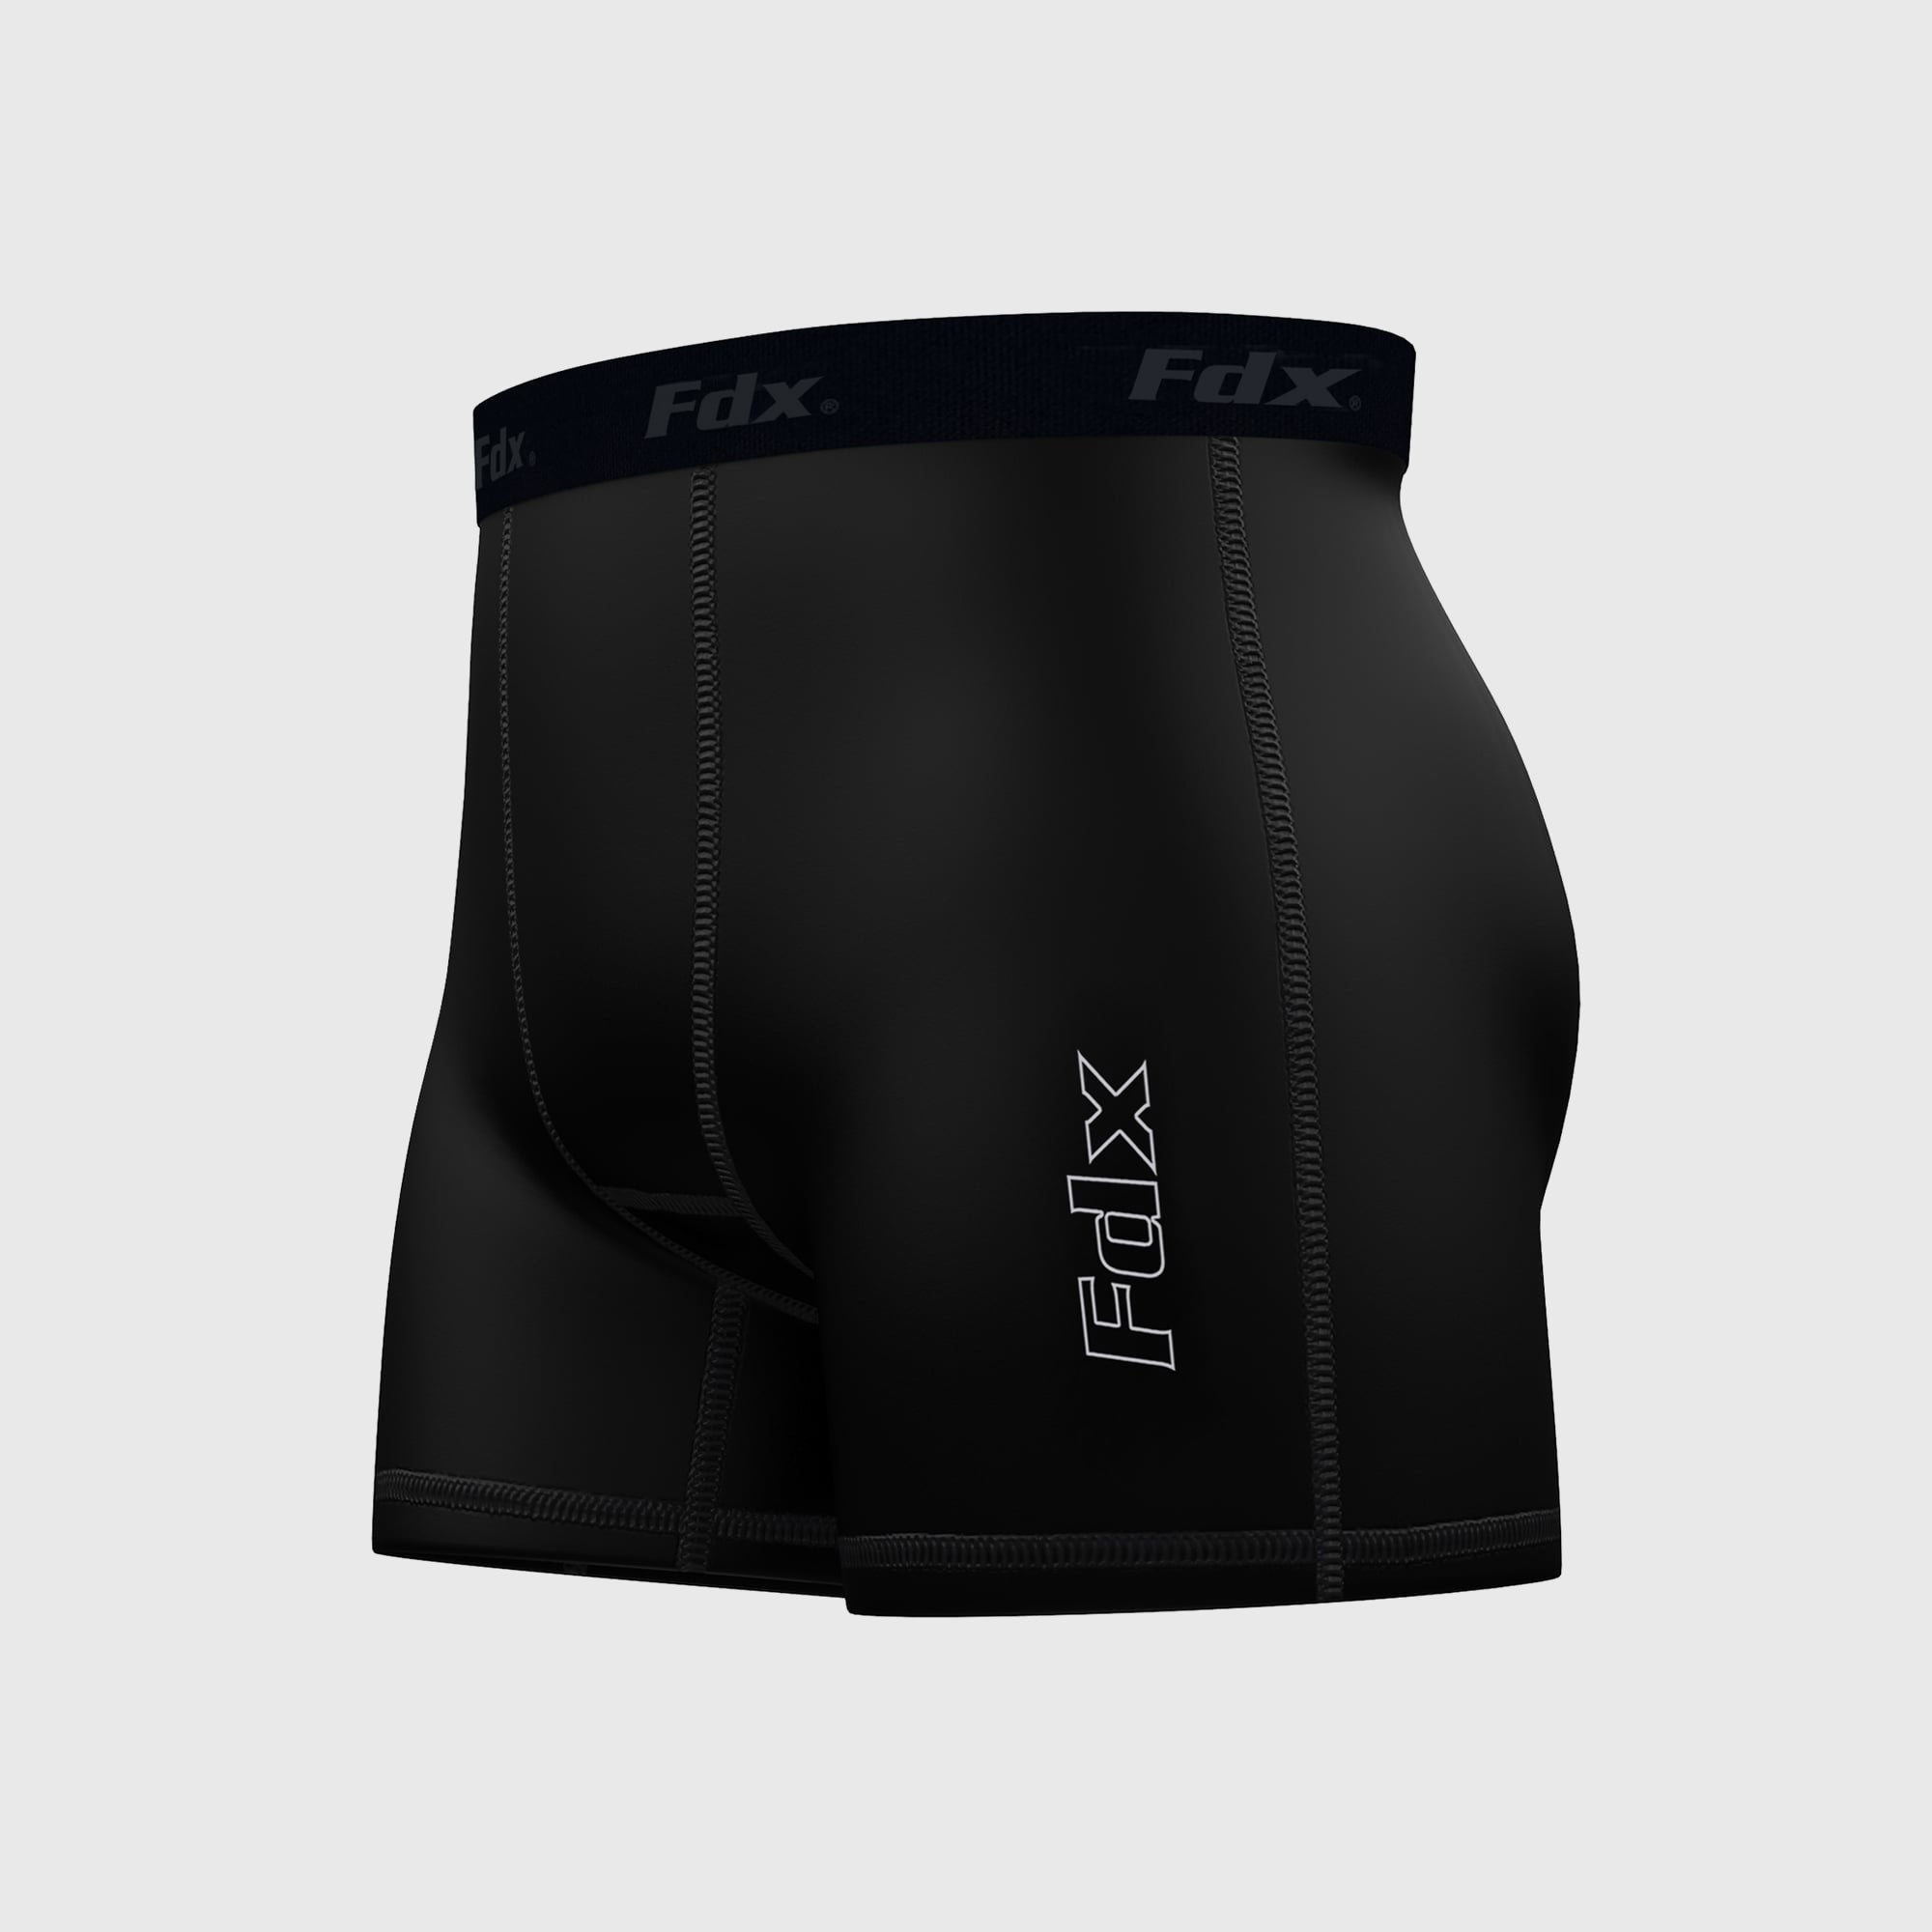 TRAINING Under Armour RECOVERY COMPRESSION - Cycling Shorts - Men's - black  - Private Sport Shop